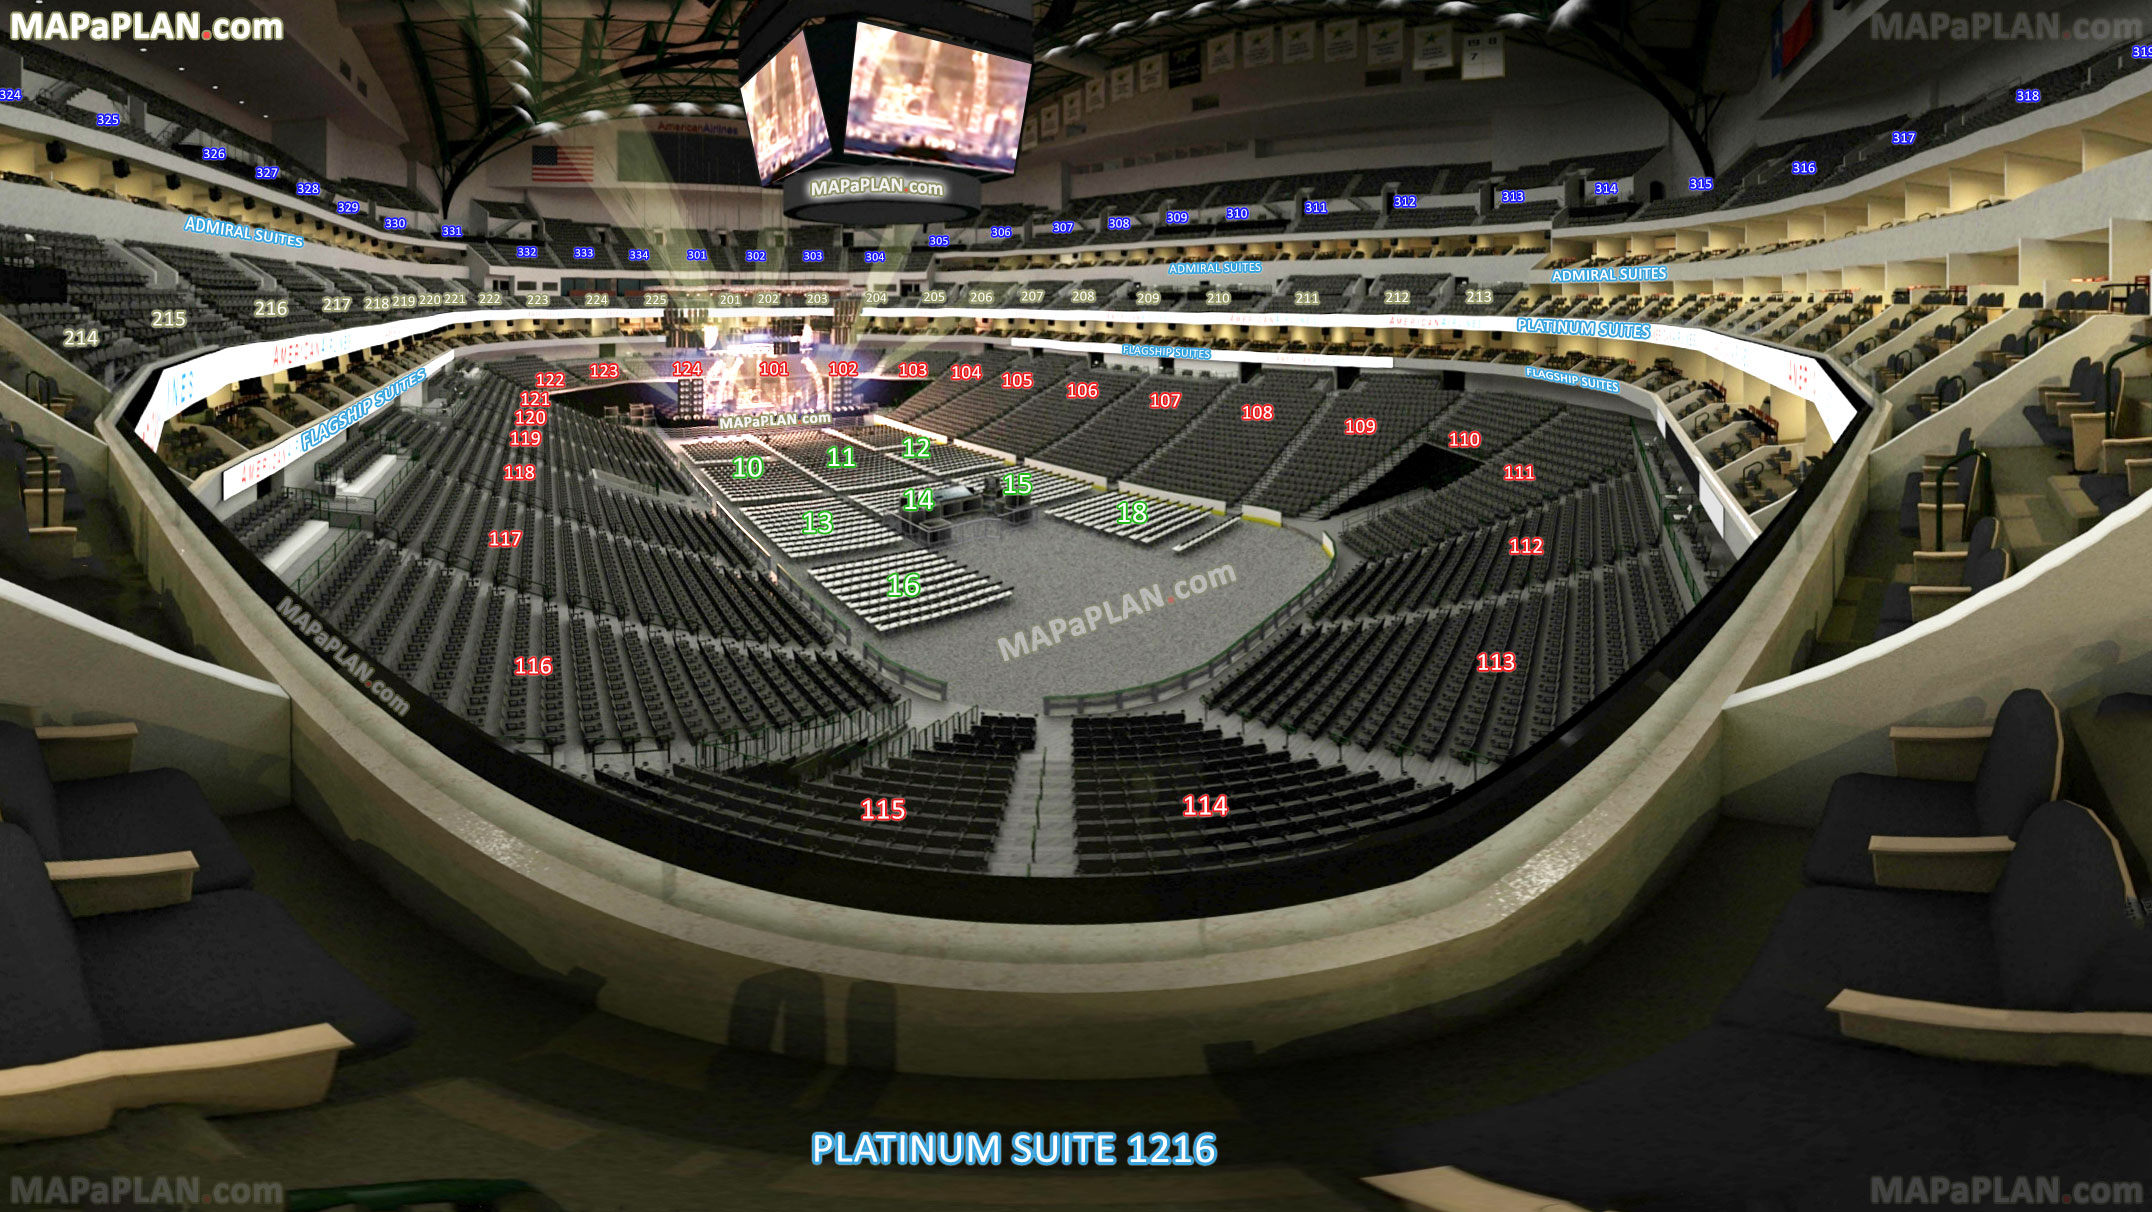 view from platinum suite 1216 good bad seats review information behind stage arena sections interior guide Dallas American Airlines Center seating chart